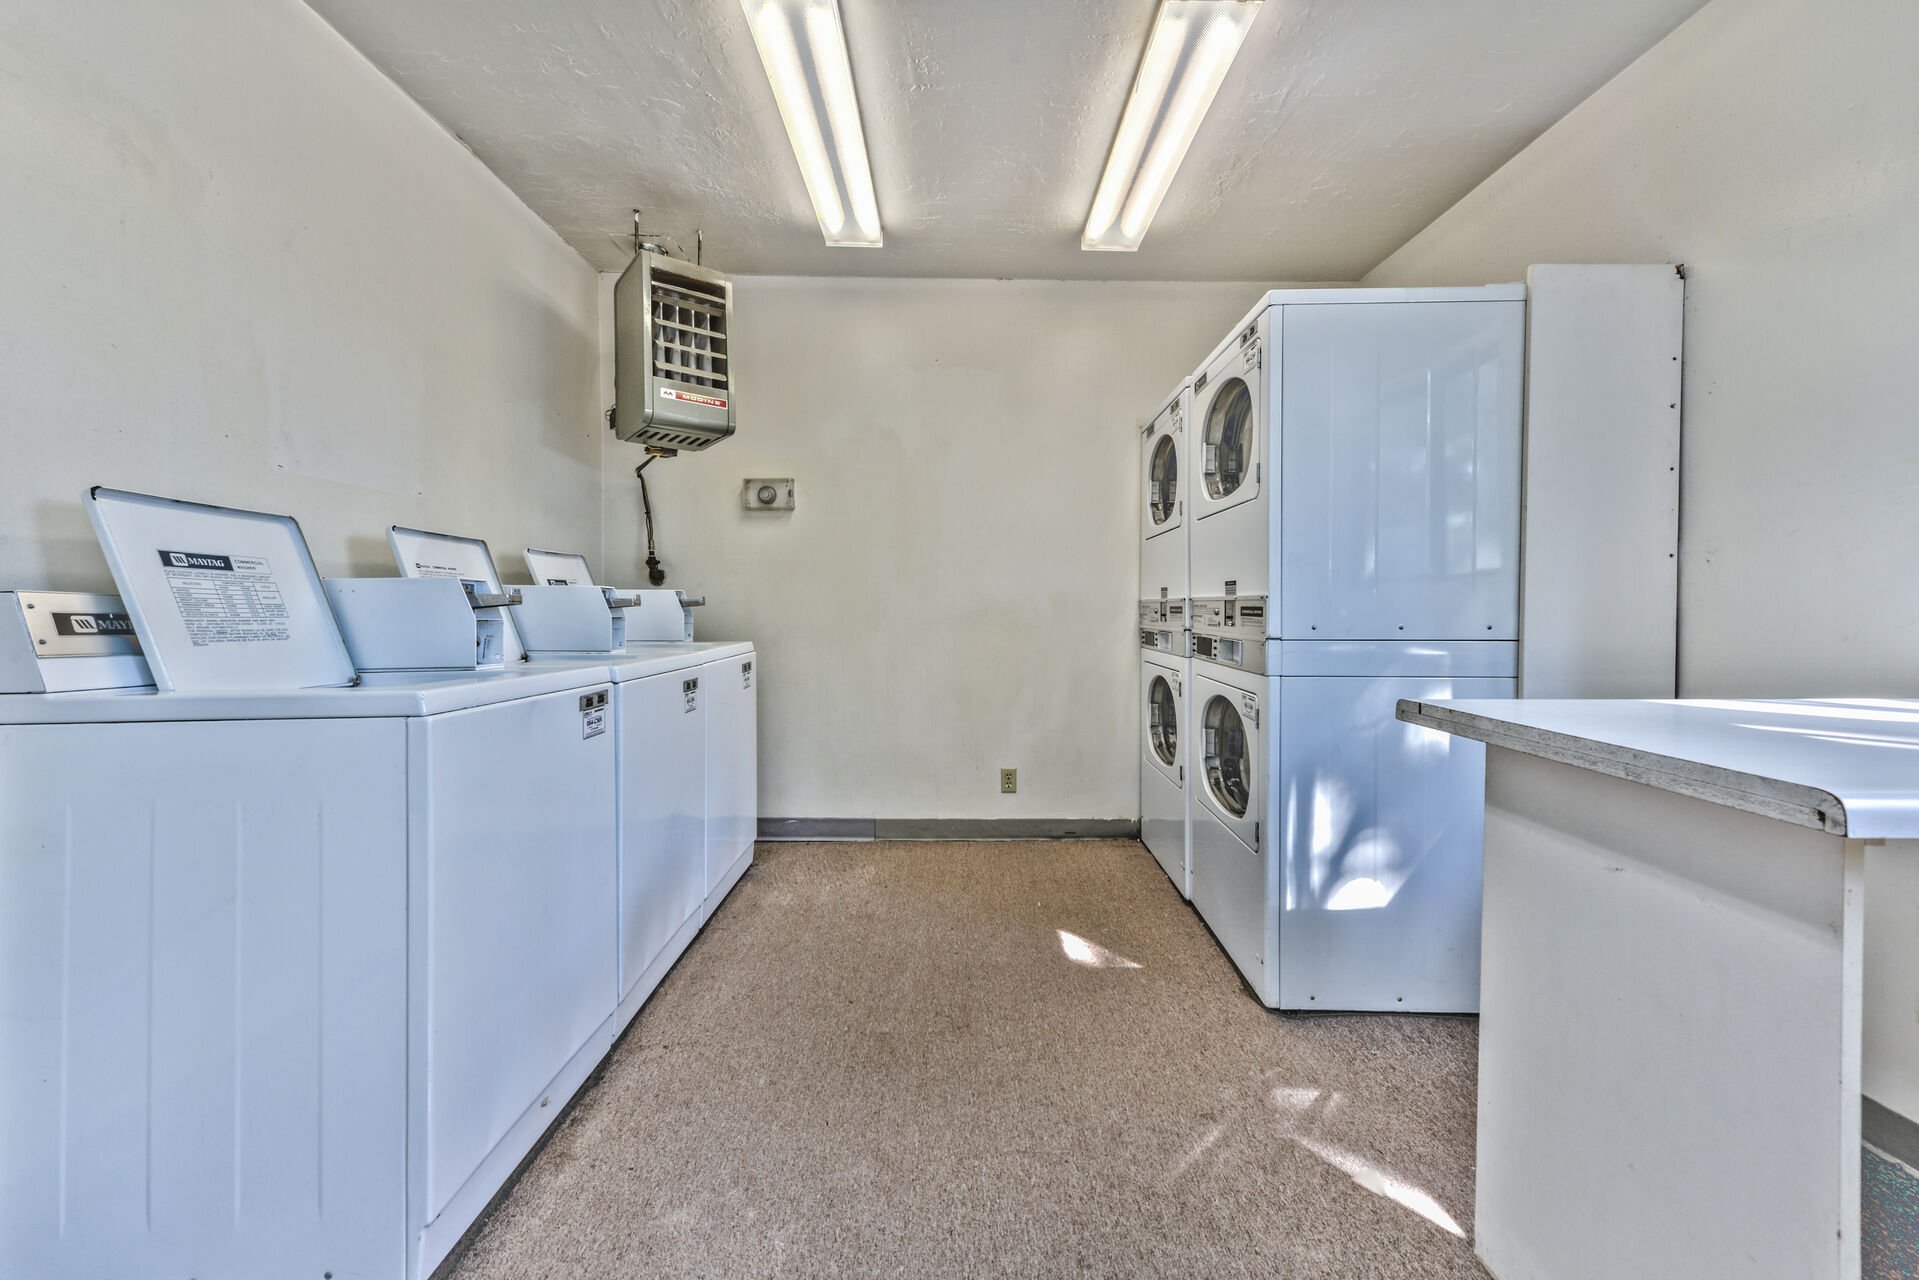 Communal Laundry Room in Pool House